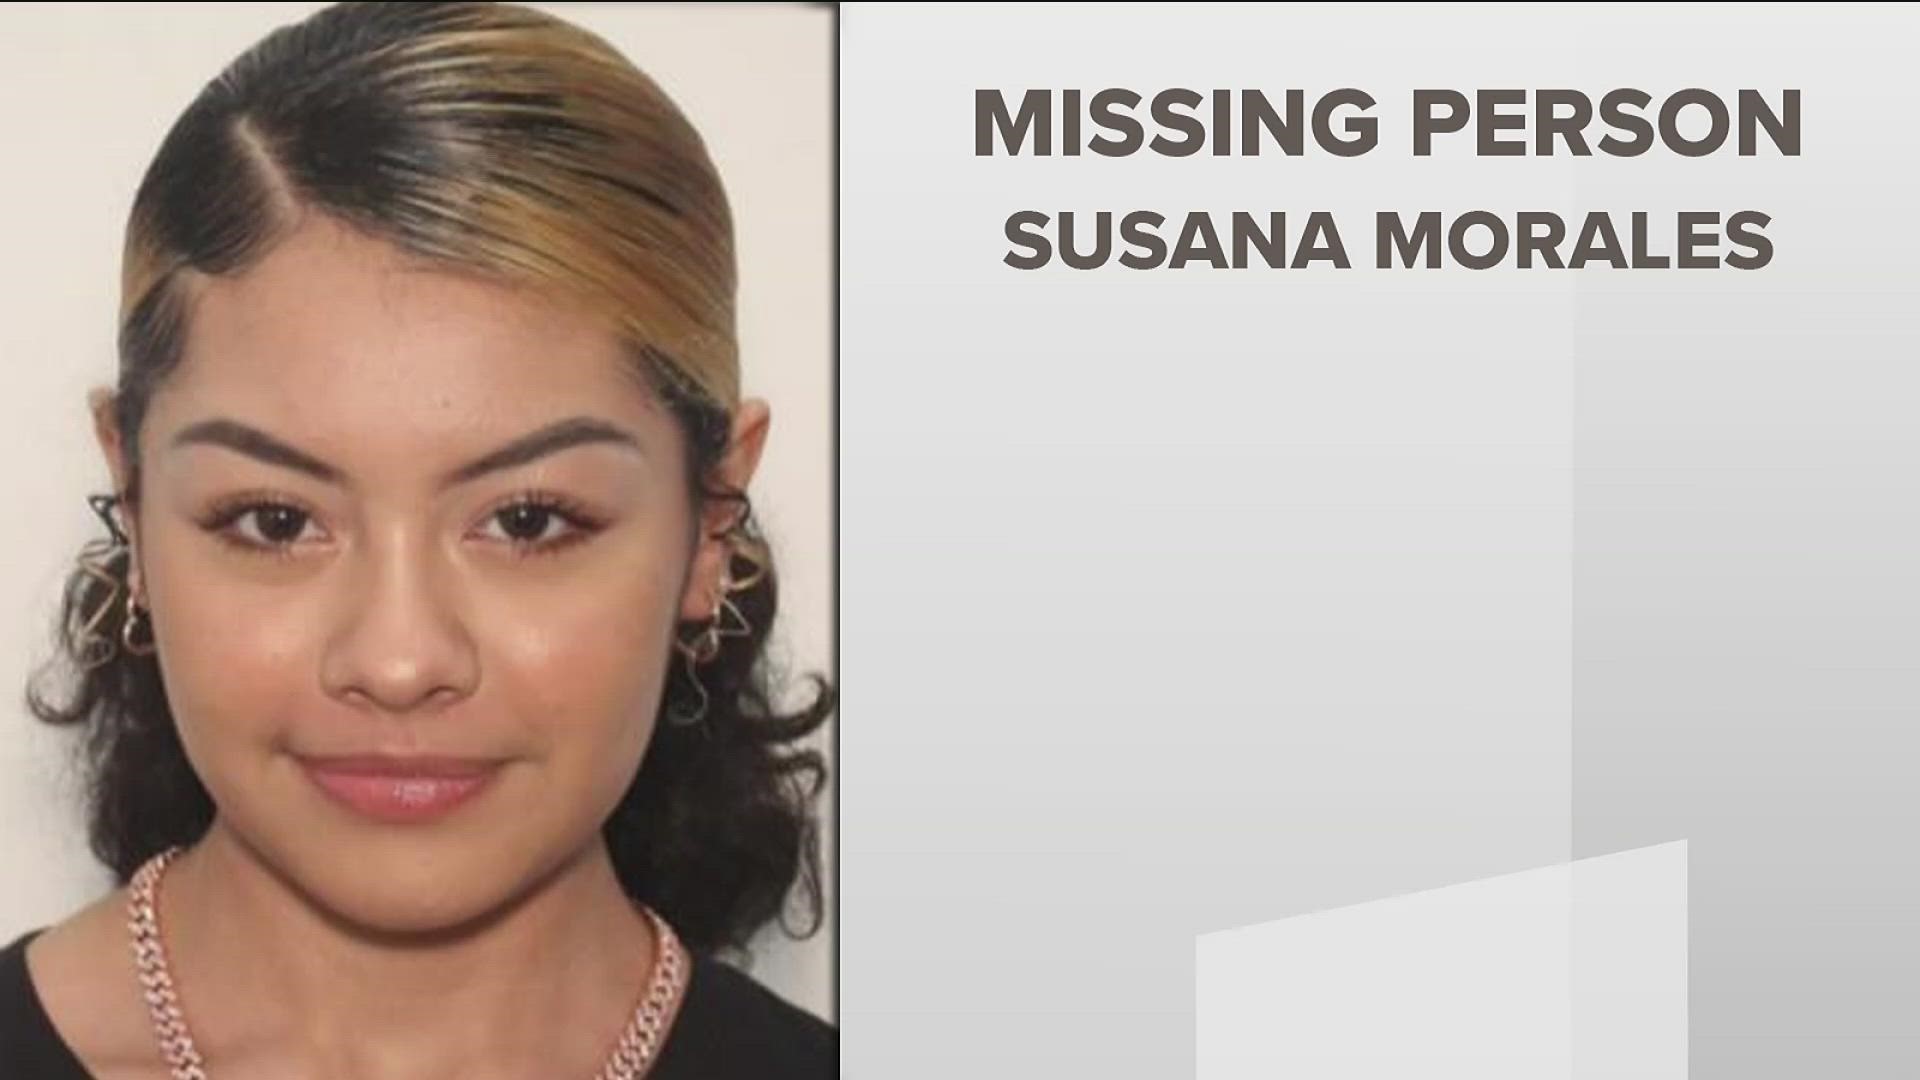 16-year-old Susana Morales was last seen wearing light blue jeans, a yellow spaghetti-strapped shirt and white crocs as she was walking home on Singleton Road.